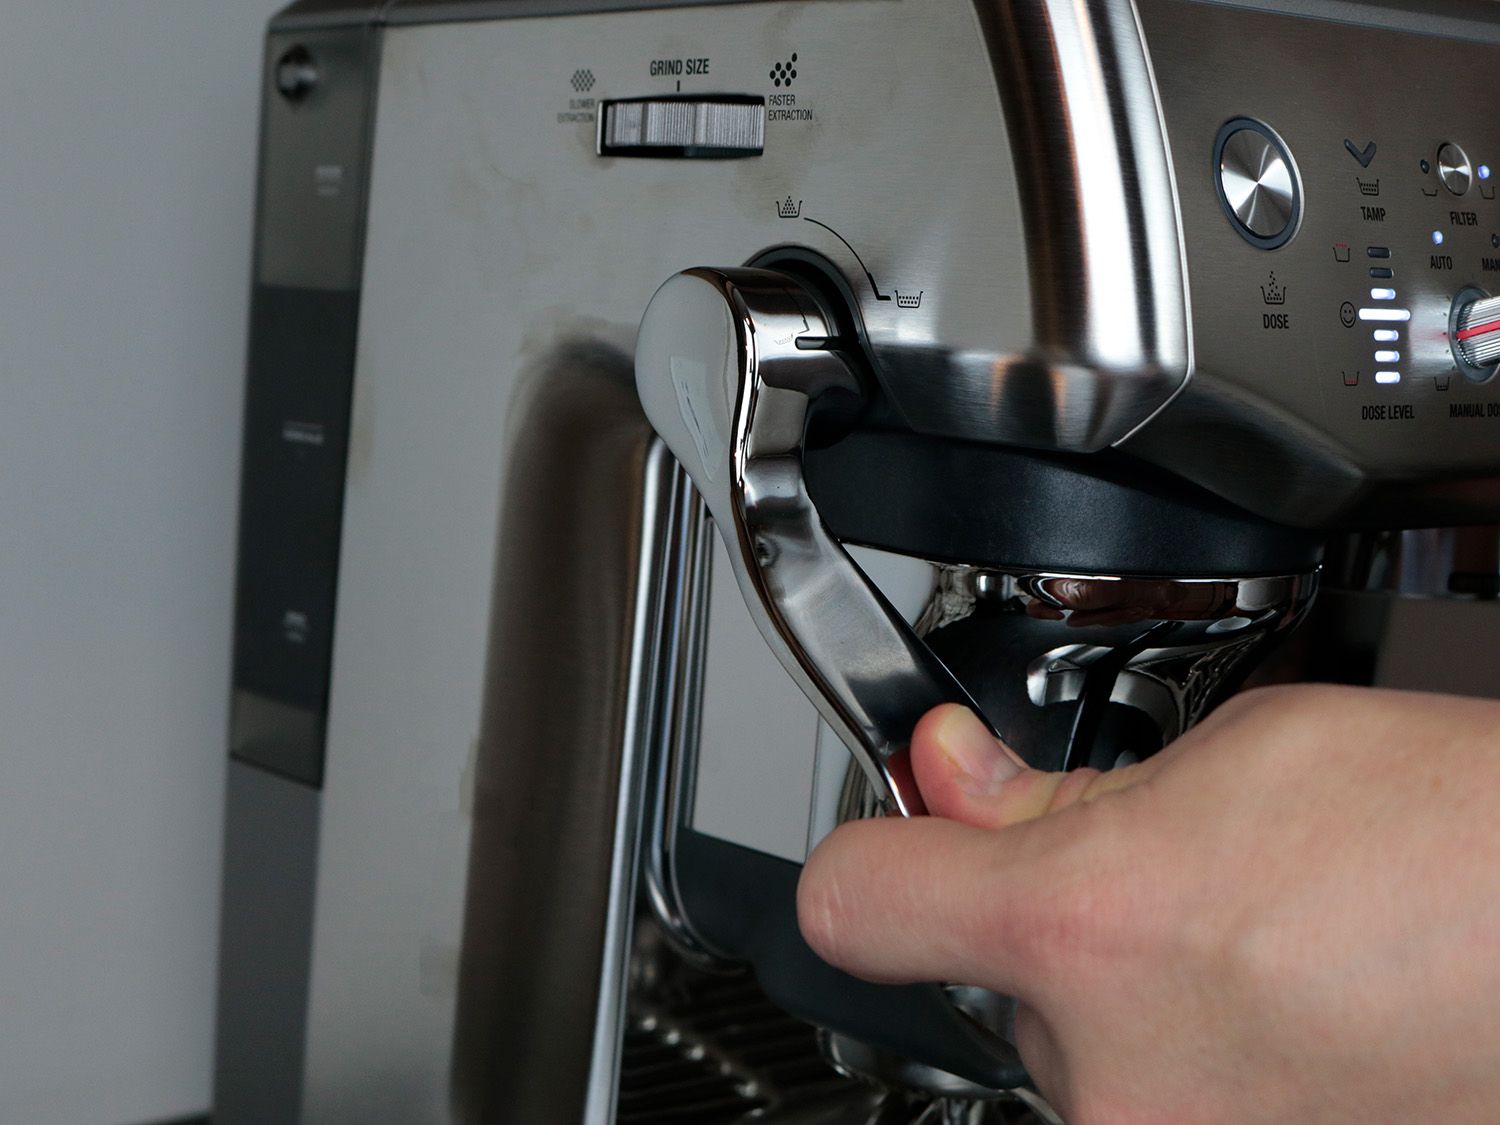 a lever on an espresso machine is pressed down, tamping a coffee puck